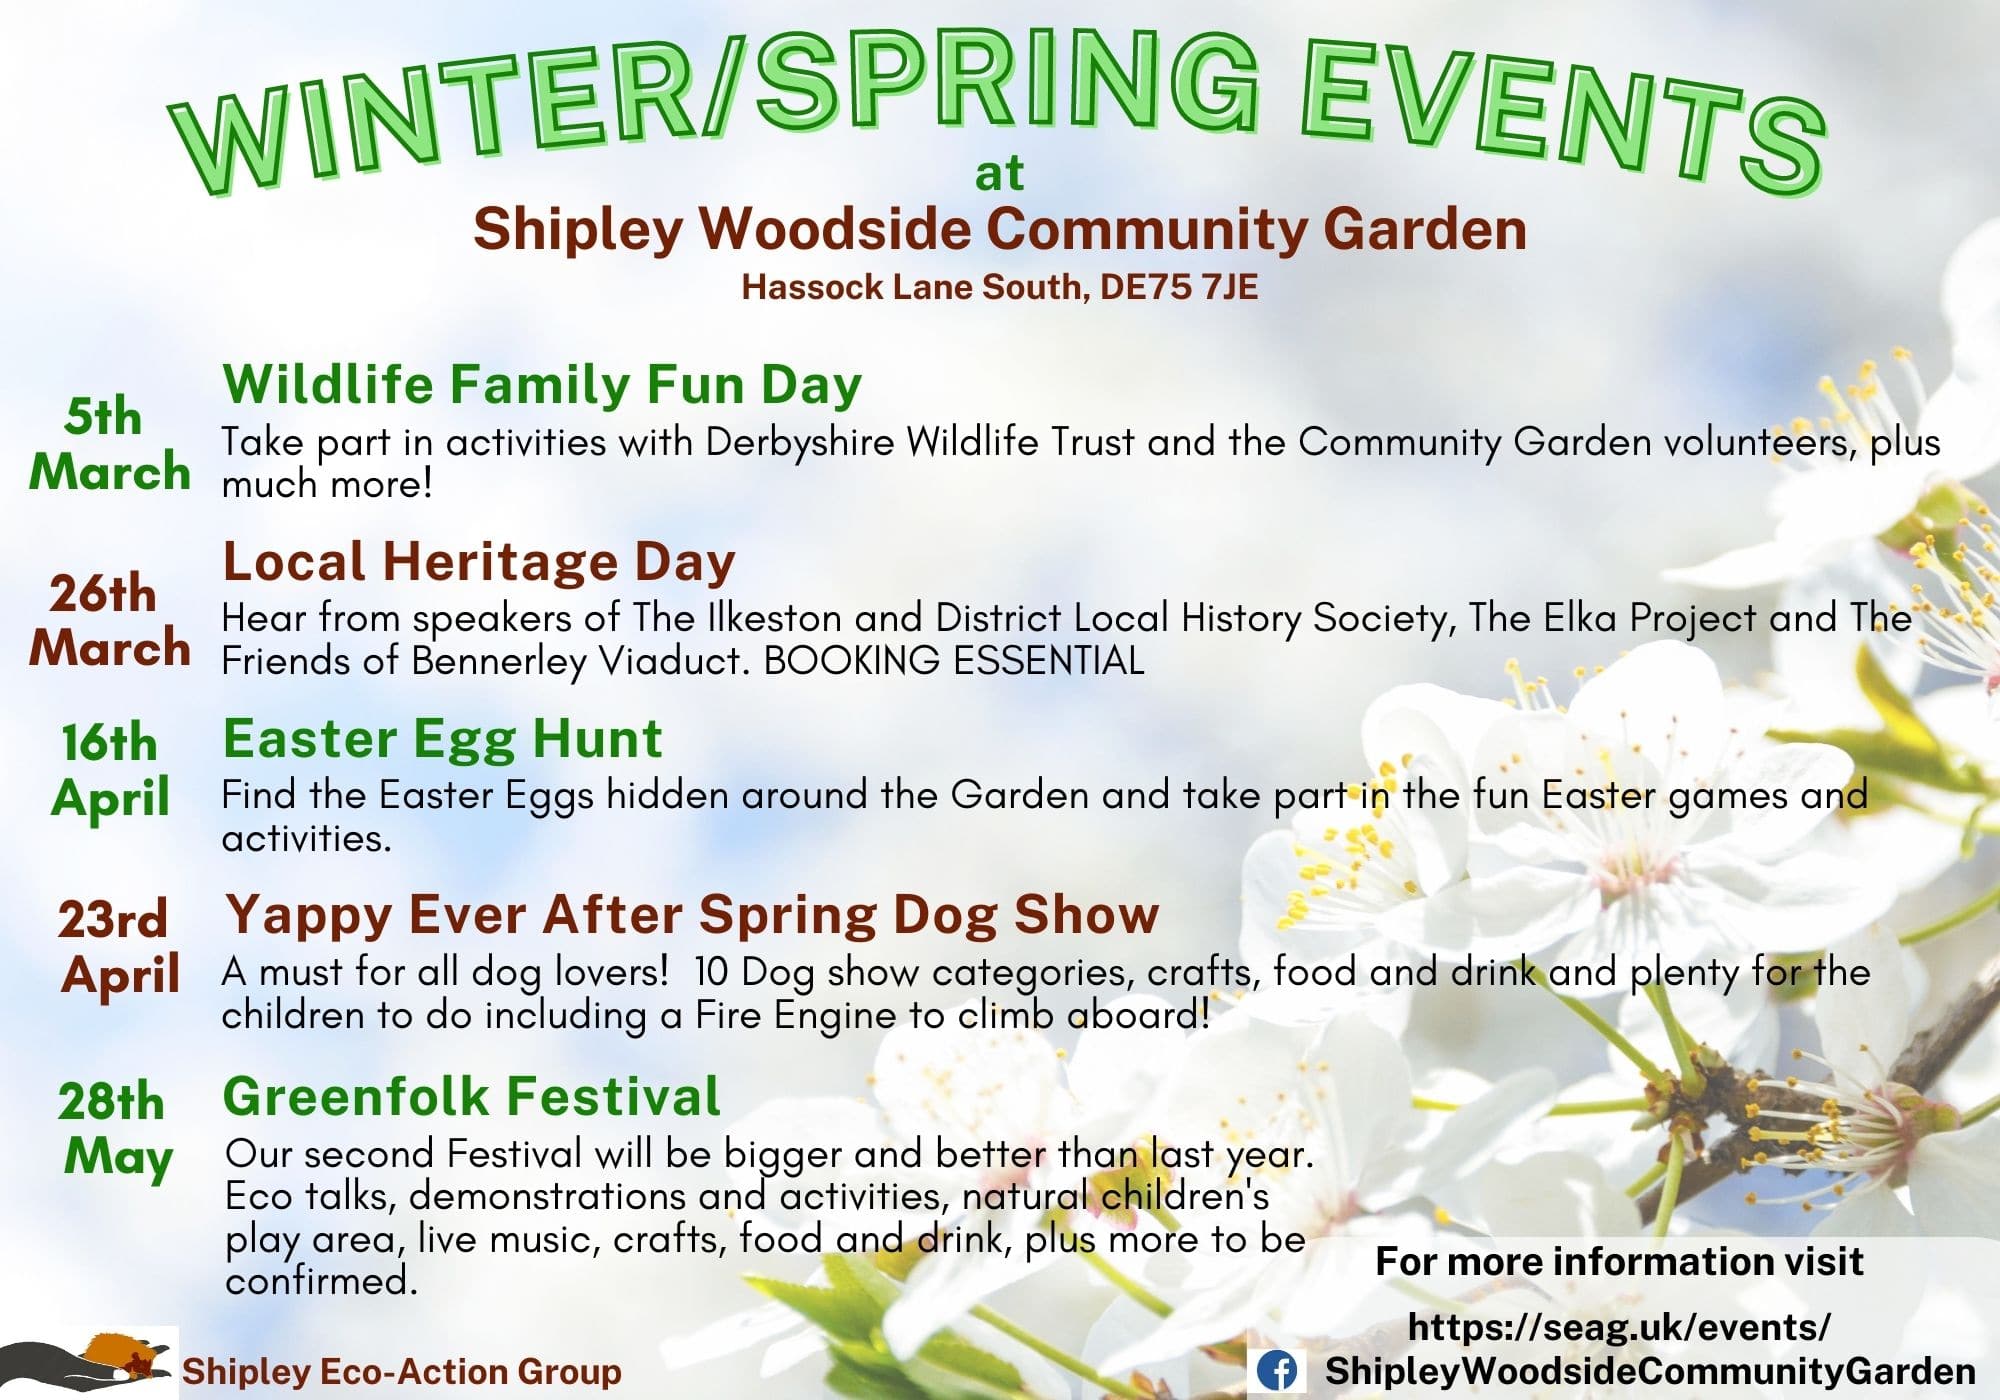 Winter/Spring Events confirmed at the Community Garden - SEAG - Shipley Eco-Action Group